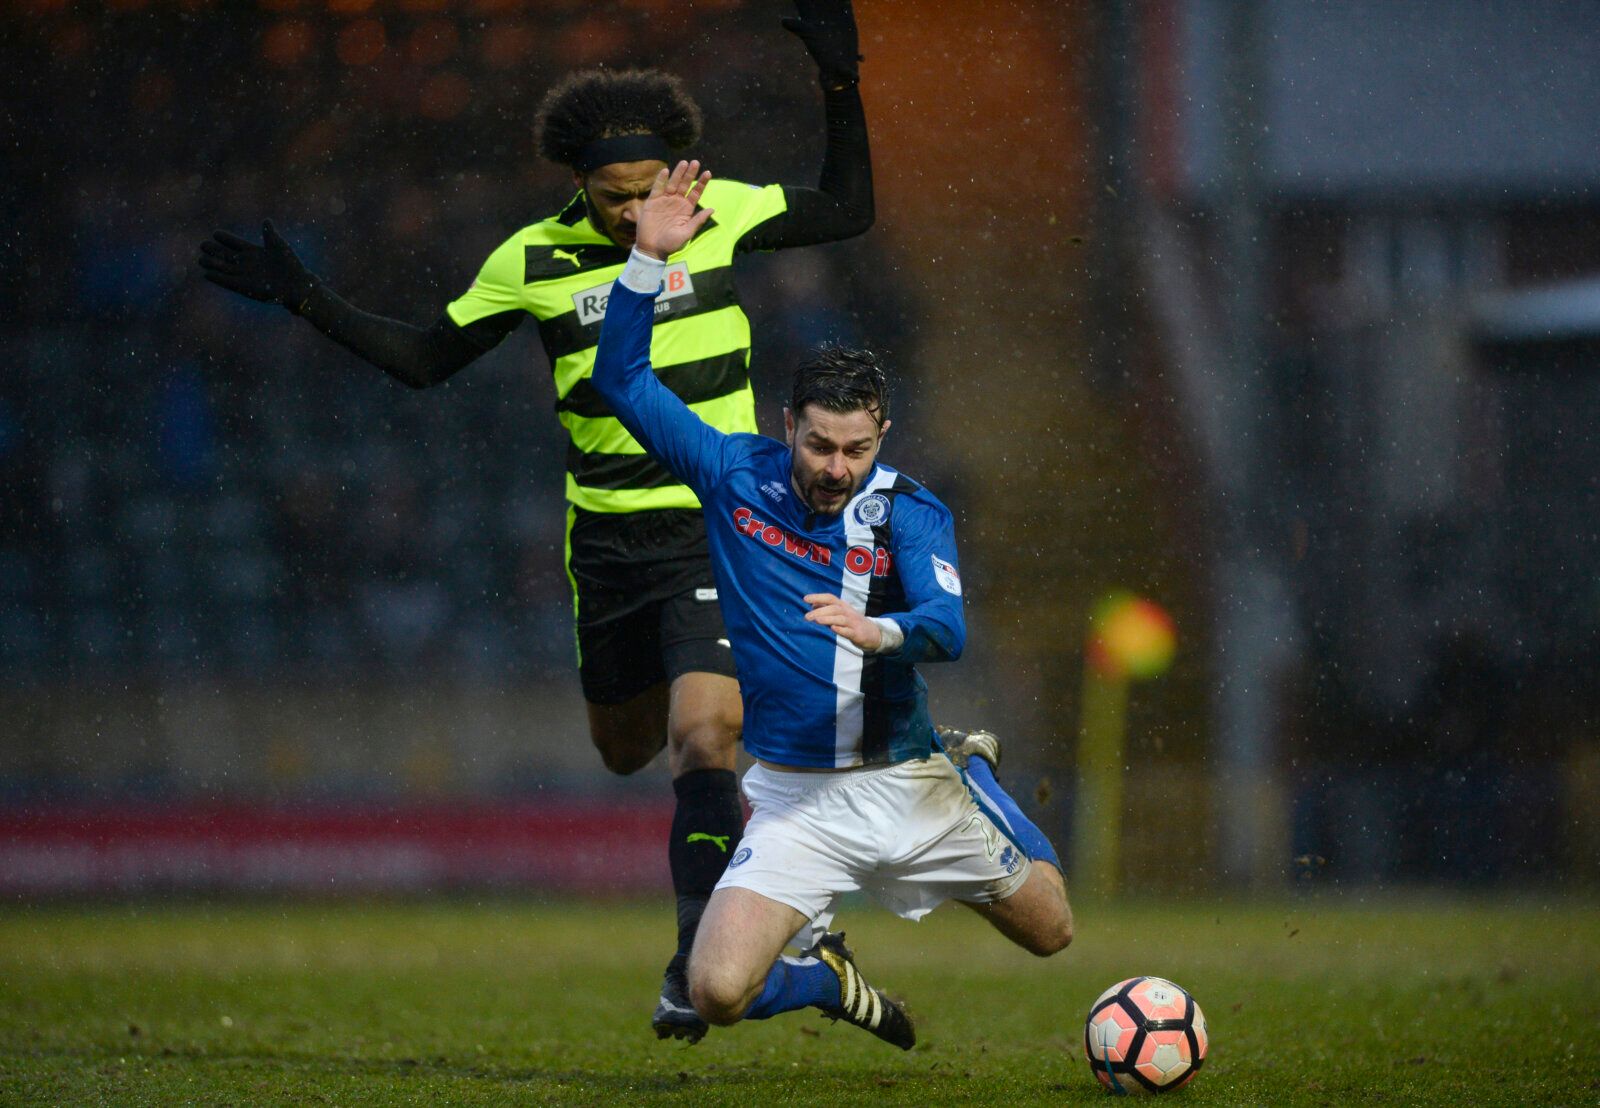 Britain Football Soccer - Rochdale v Huddersfield Town - FA Cup Fourth Round - Crown Oil Arena - 28/1/17 Rochdale's Joseph Rafferty is fouled by Huddersfield Towns Izzy Brown Mandatory Credit: Action Images / Adam Holt Livepic EDITORIAL USE ONLY. No use with unauthorized audio, video, data, fixture lists, club/league logos or 